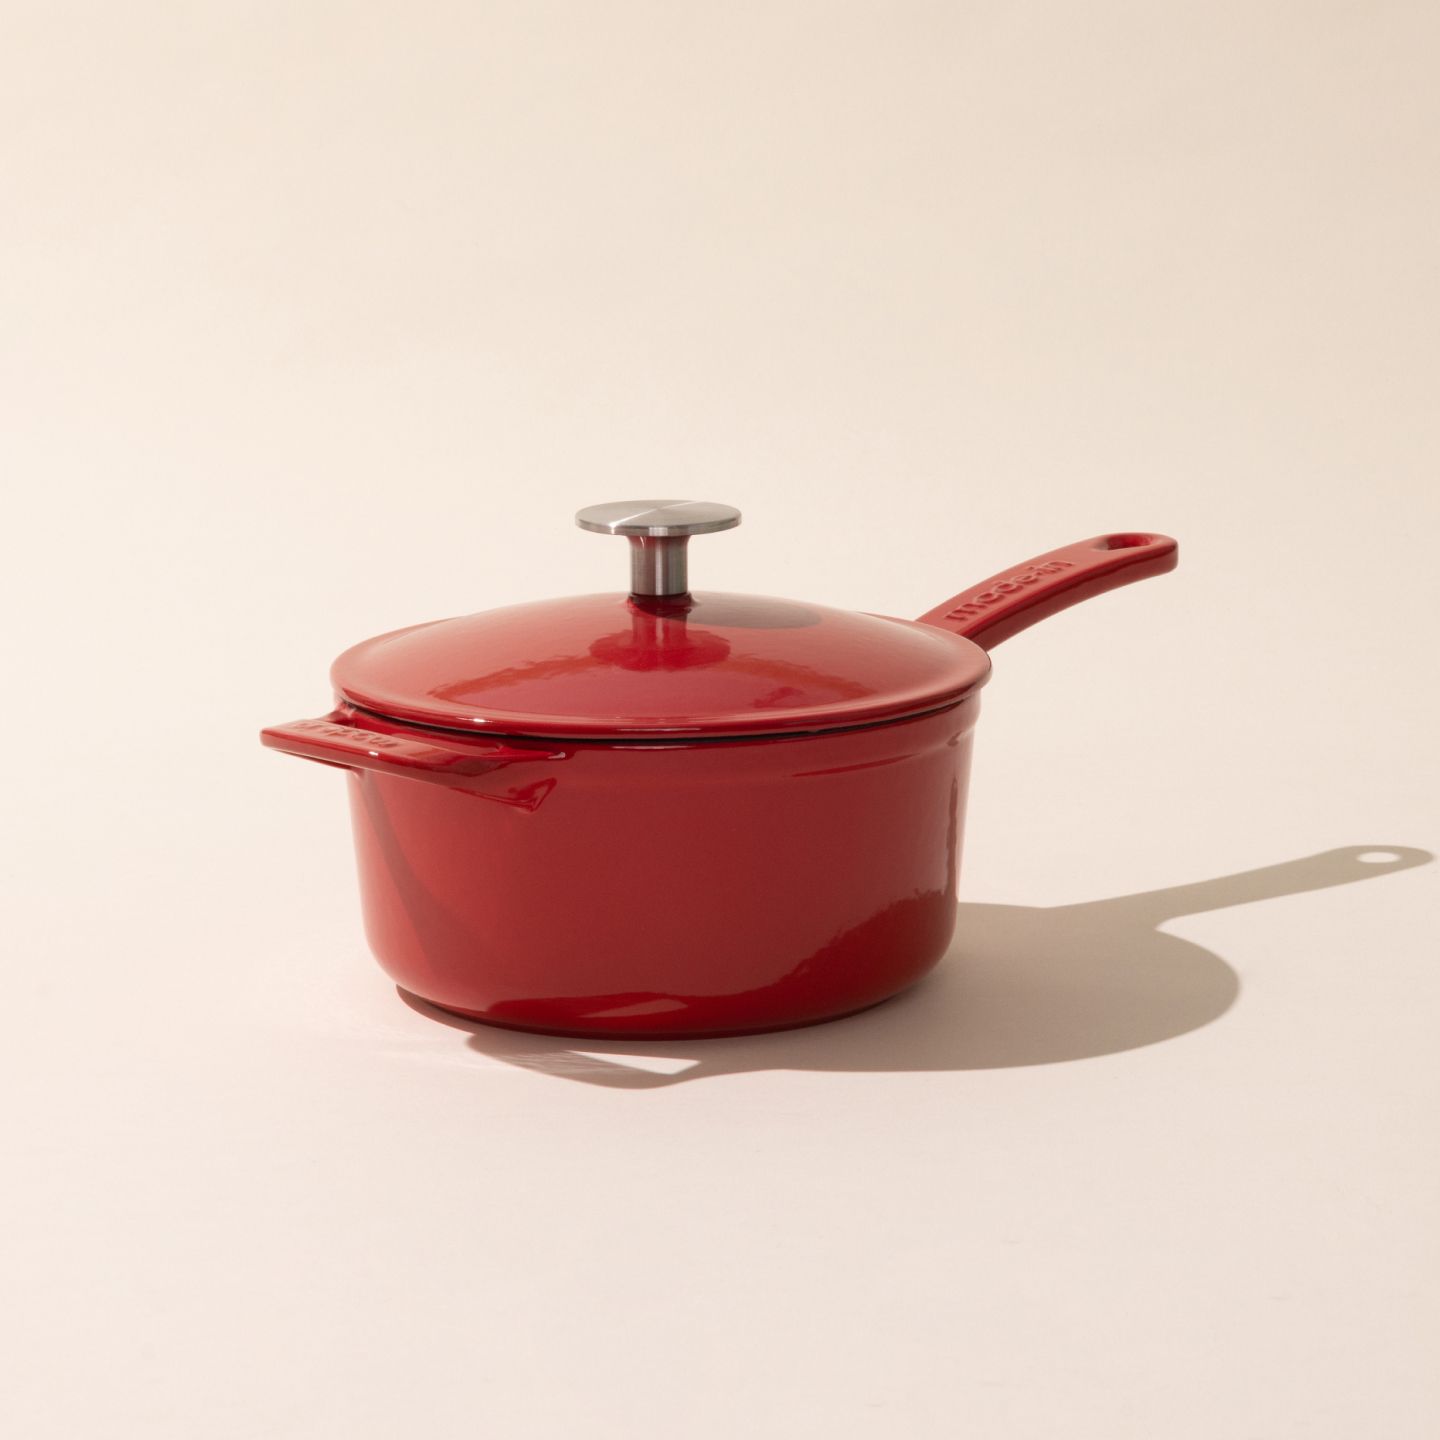 Enameled Cast Iron 2 Quart Sauce Pan with Lid - Red – Eco + Chef Kitchen